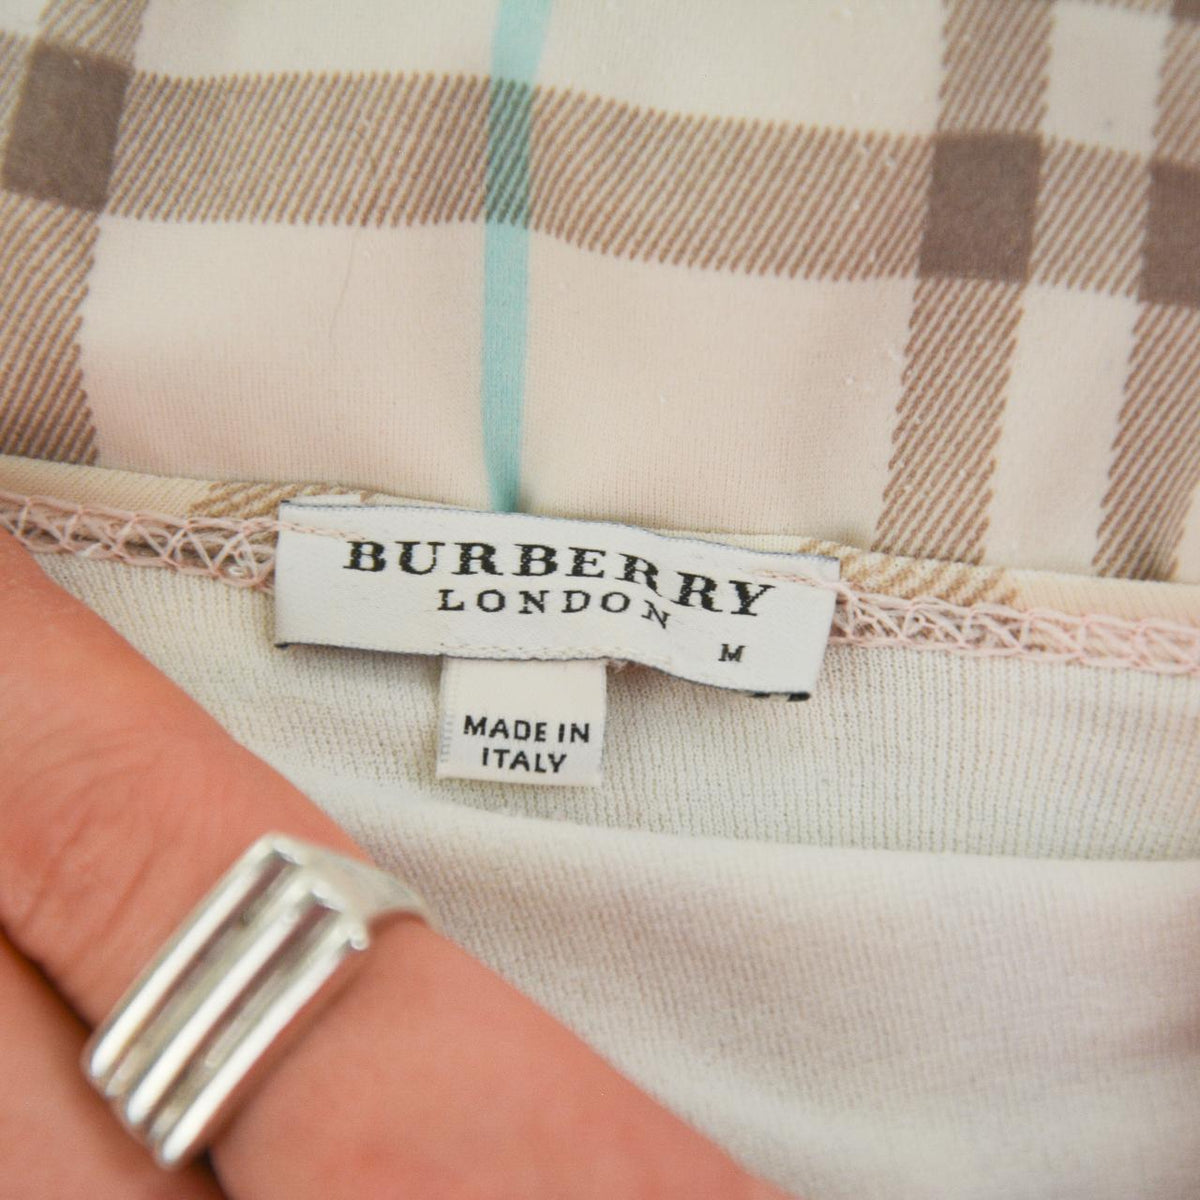 Vintage Burberry Swimming Costume Size M